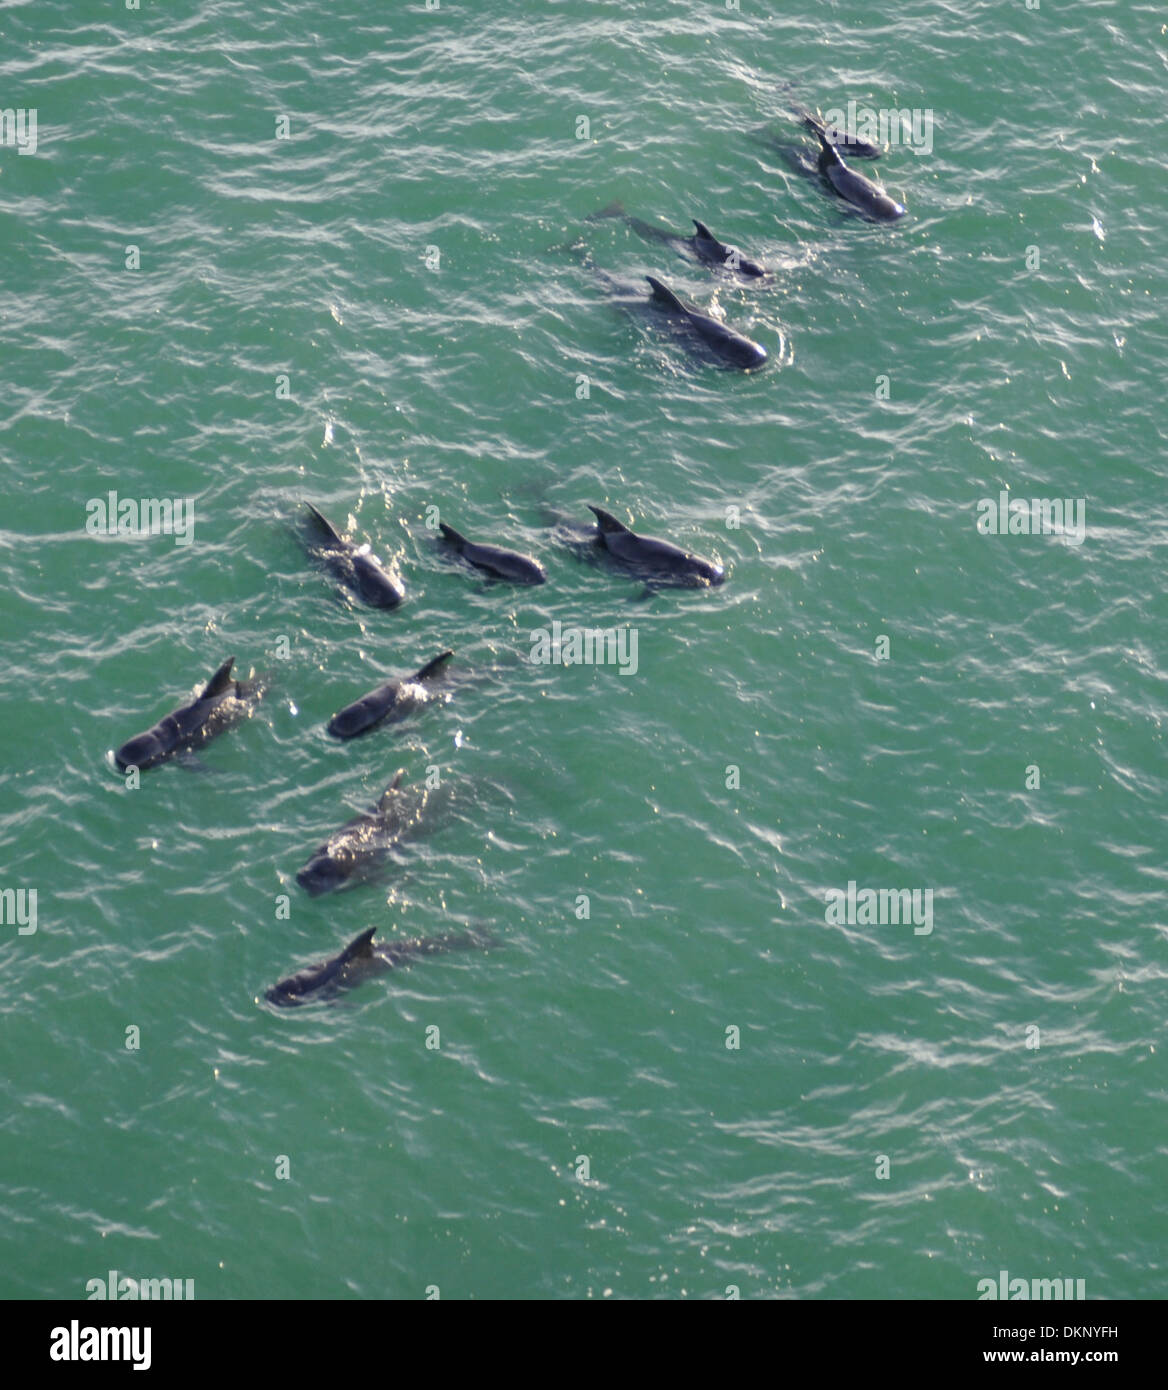 A pod of pilot whales swims off the coast of Everglades National Park, Fla., Dec. 5, 2013. The Coast Guard assisted the National Oceanic and Atmospheric Administration (NOAA) after several beached whales were observed off the coast of Highland Beach, Fla. Stock Photo